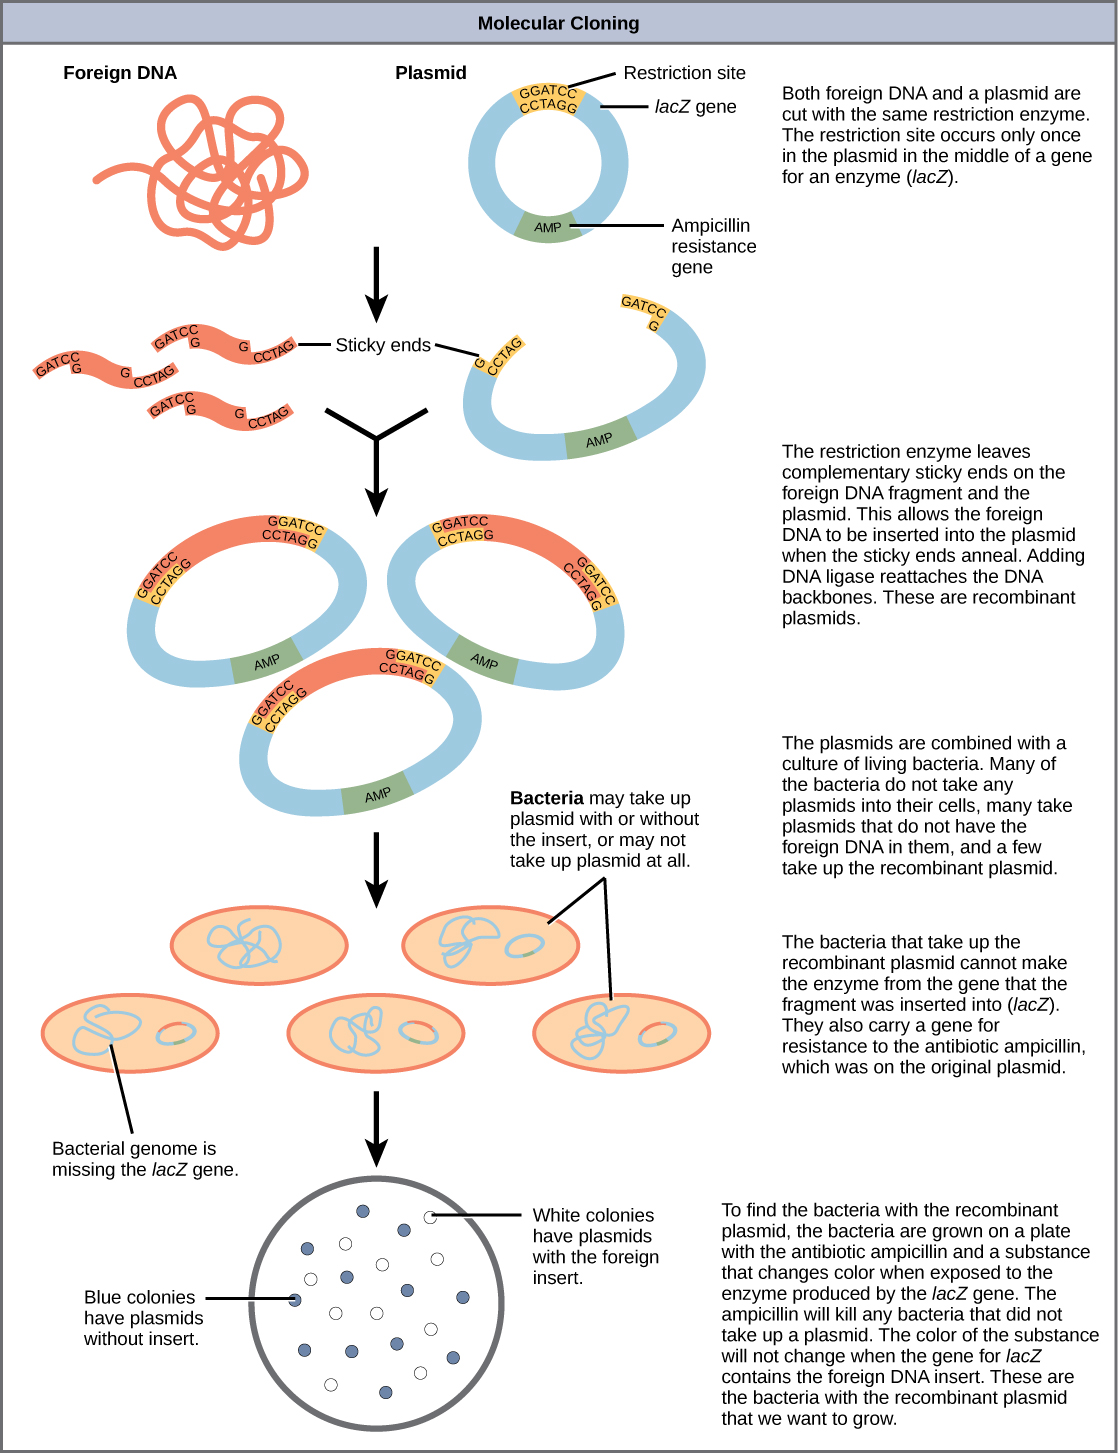 An illustration showing the steps in creating recombinant DNA plasmids, inserting them into bacteria, and then selecting only the bacteria that have successfully taken up the recombinant plasmid. The steps are as follows: both foreign DNA and a plasmid are cut with the same restriction enzyme. The restriction site occurs only once in the plasmid in the middle of a gene for an enzyme (lacZ). The restriction enzyme leaves complementary sticky ends on the foreign DNA fragment and the plasmid. This allows the foreign DNA to be inserted into the plasmid when the sticky ends anneal. Adding DNA ligase reattaches the DNA backbones. These are recombinant plasmids. The plasmids are combined with a culture of living bacteria. Many of the bacteria do not take any plasmids into their cells, many take plasmids that do not have the foreign DNA in them, and a few take up the recombinant plasmid. The bacteria that take up the recombinant plasmid cannot make the enzyme from the gene that the fragment was inserted into (lacZ). They also carry a gene for resistance to the antibiotic ampicillin, which was on the original plasmid. To find the bacteria with the recombinant plasmid, the bacteria are grown on a plate with the antibiotic ampicillin and a substance that changes color when exposed to the enzyme produced by the lacZ gene. The ampicillin will kill any bacteria that did not take up a plasmid. The color of the substance will not change when the gene for lacZ contains the foreign DNA insert. These are the bacteria with the recombinant plasmid that we want to grow.